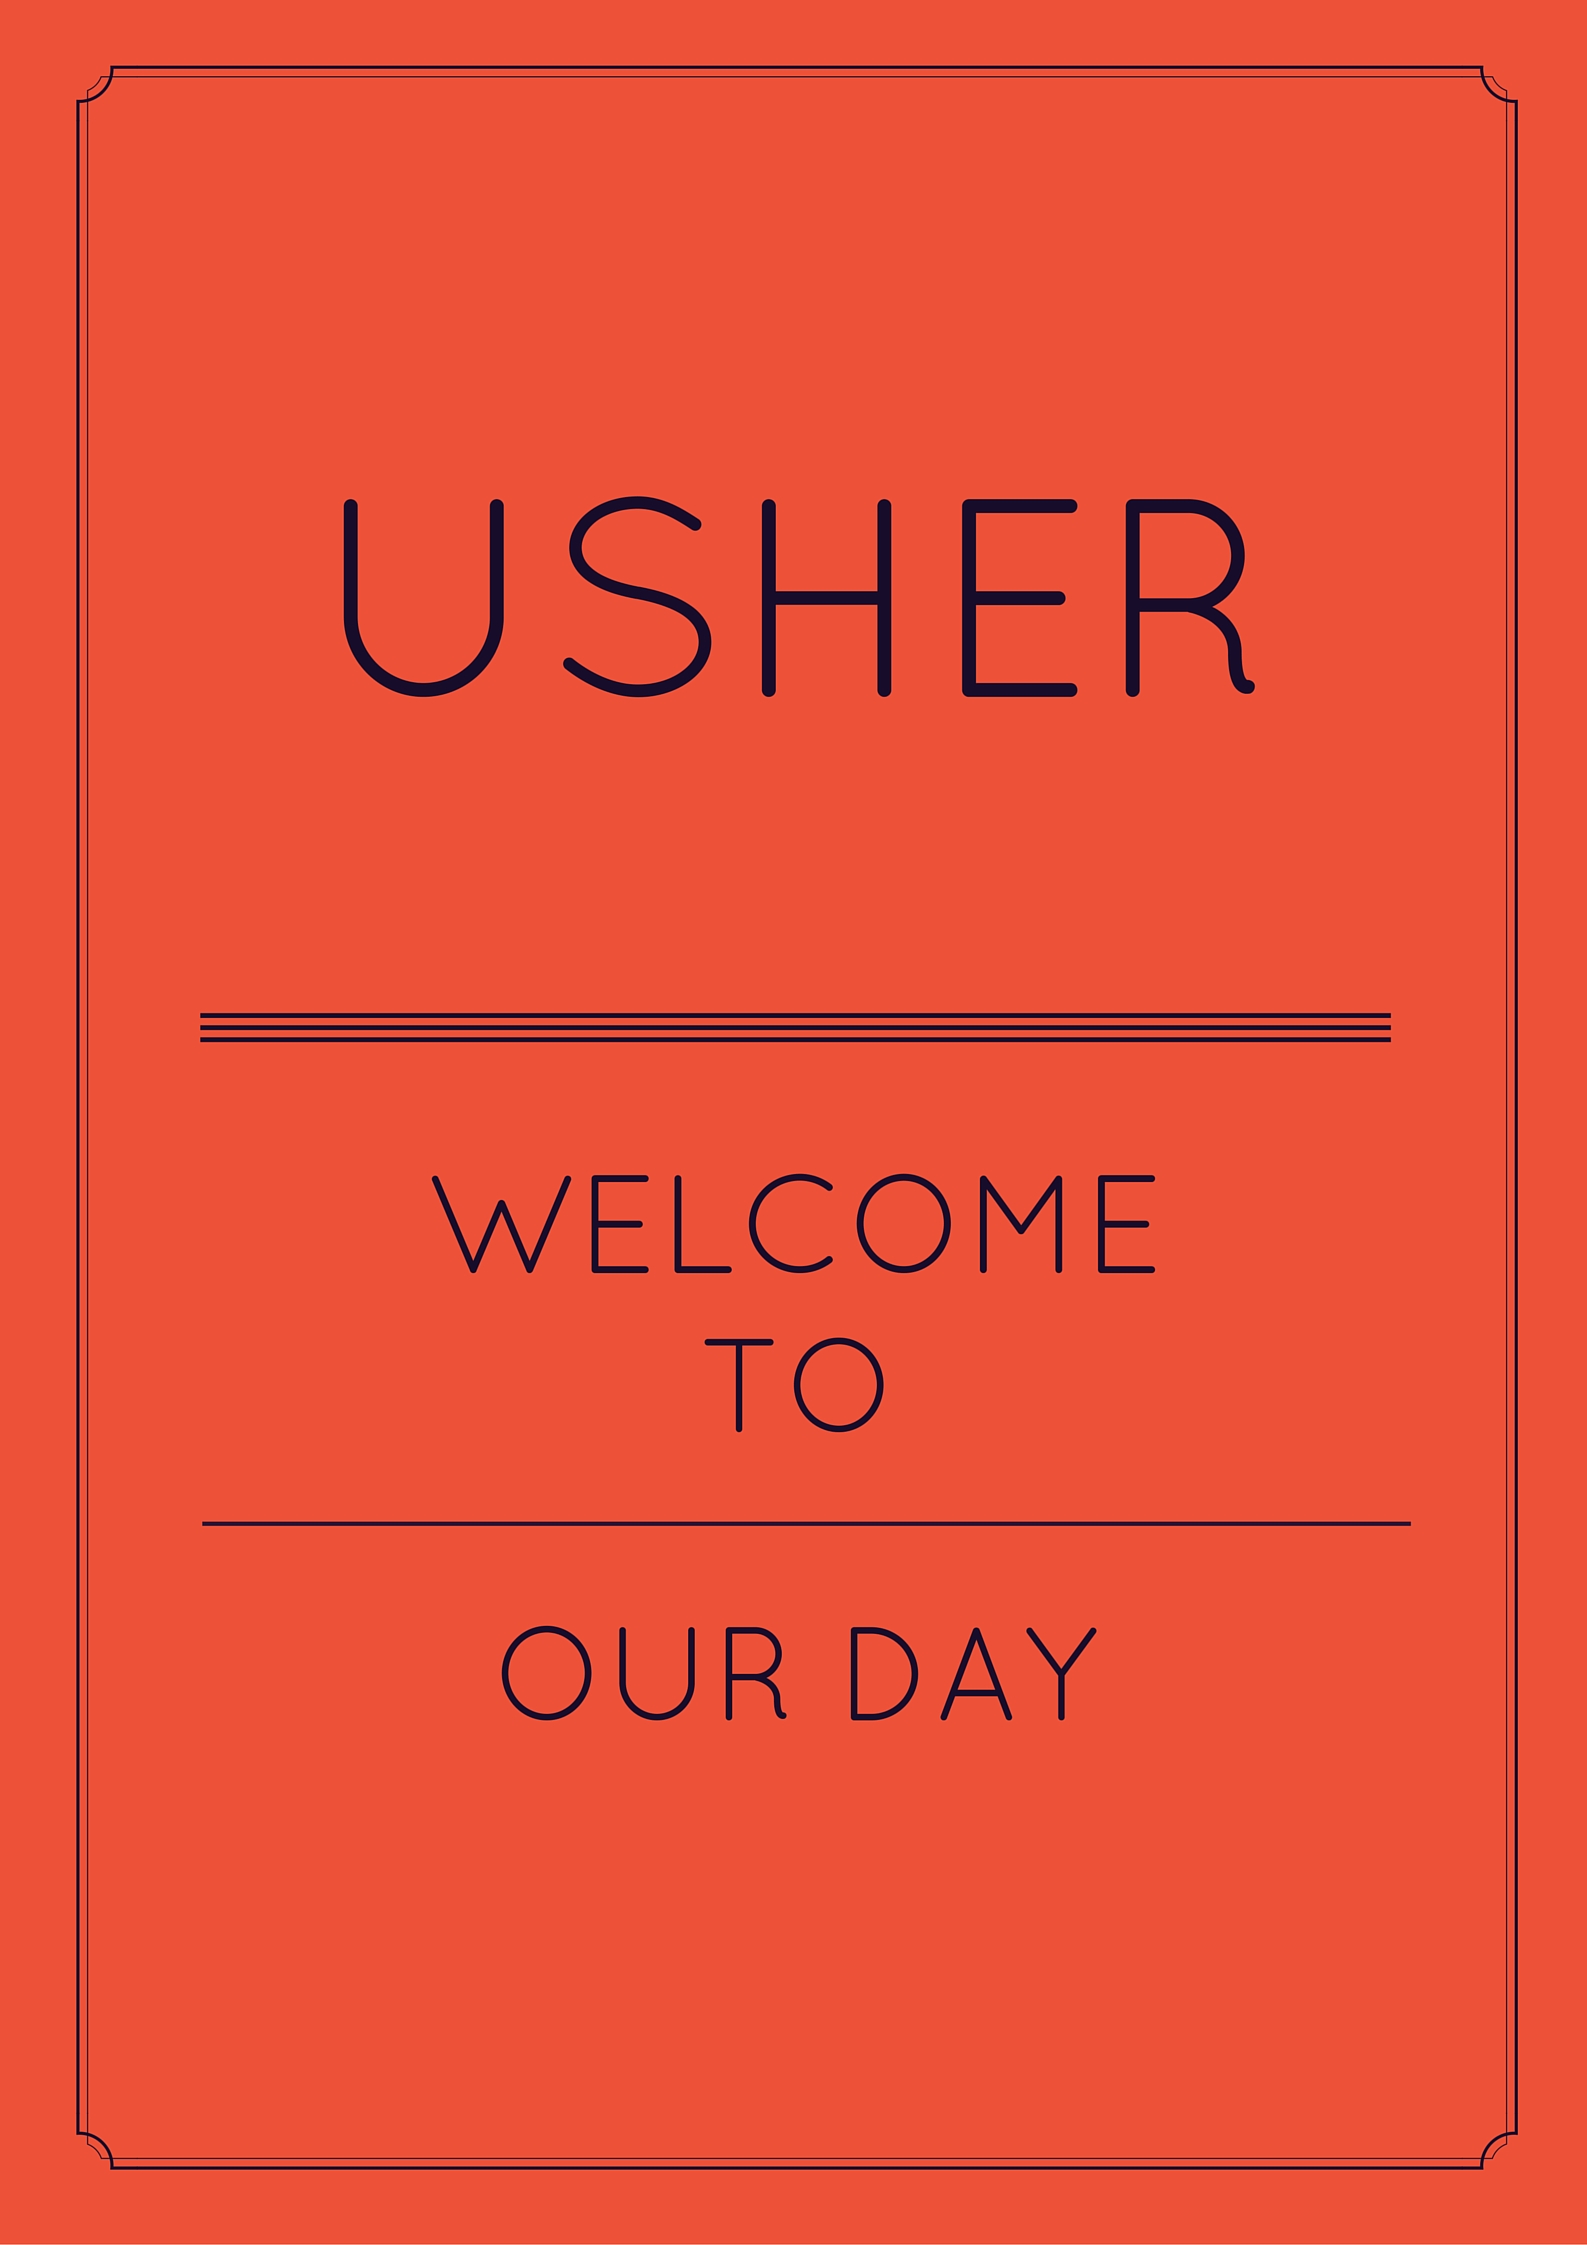 Looking for usher day speeches for church to use? Here is a ready to use speech